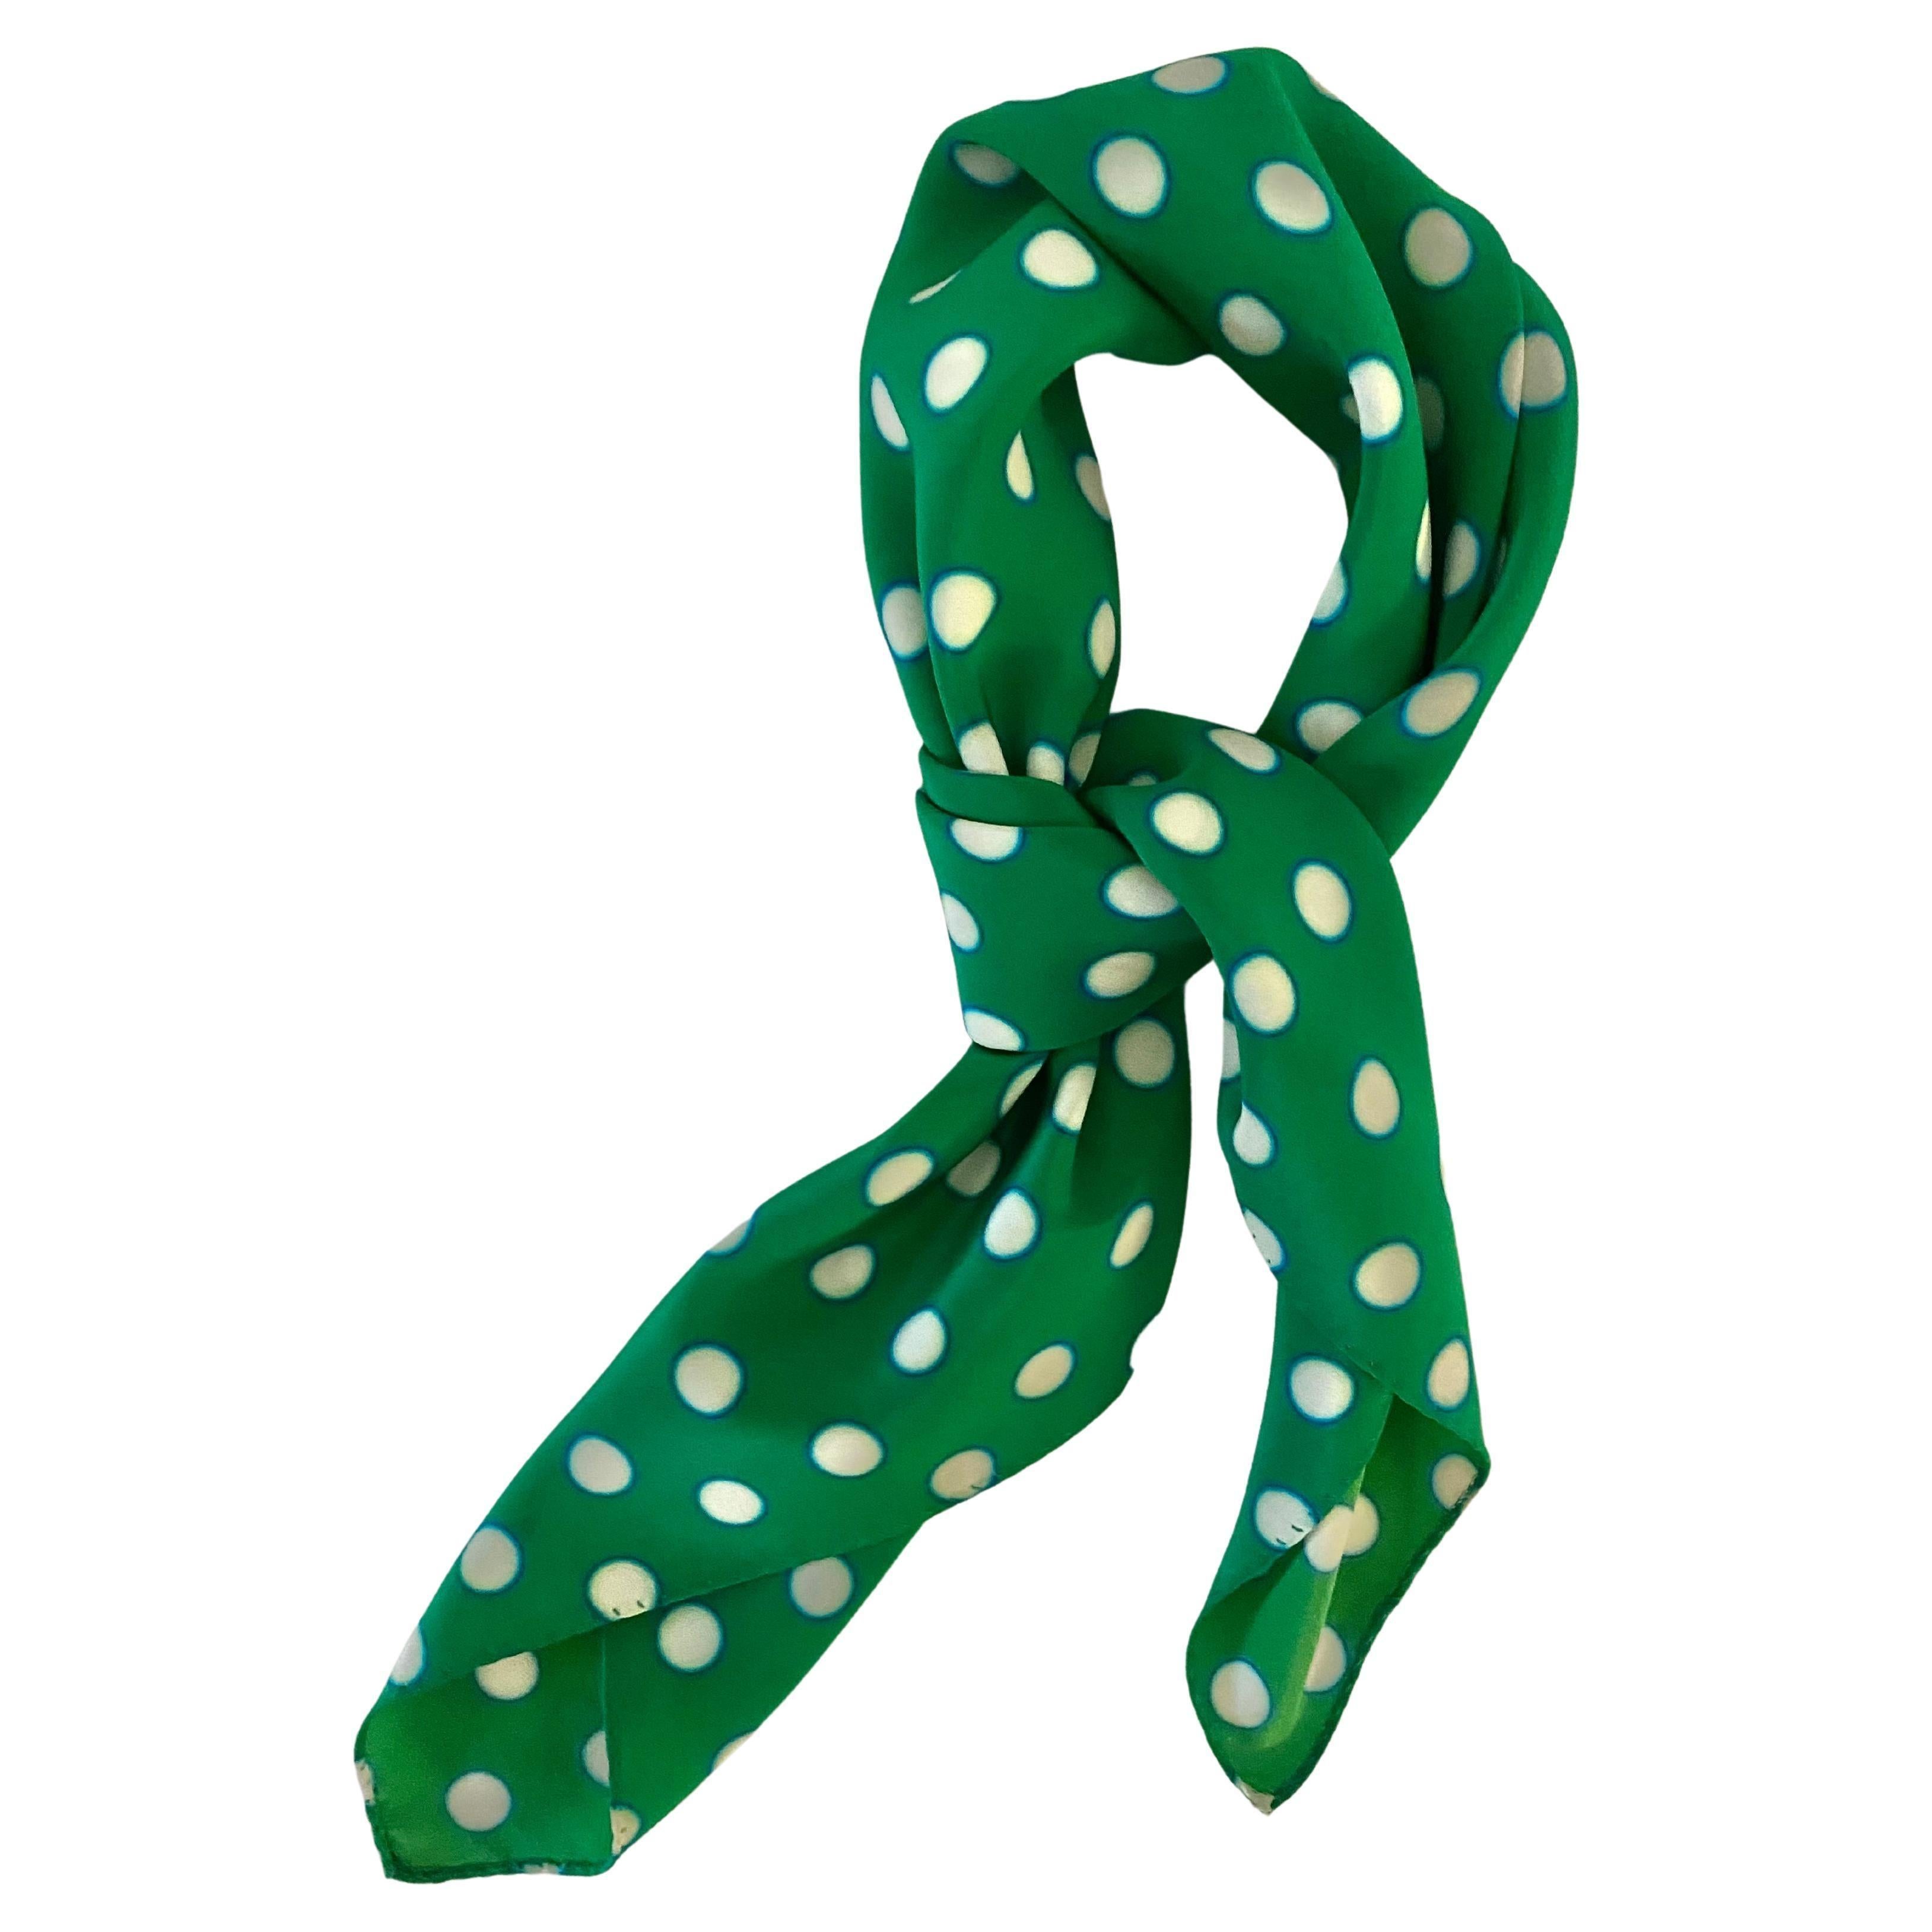 Experience Miu Miu's luxe with this green polka dot silk scarf. Adorn with finesse and style. Let this be your statement accessory speak for itself, Made in Italy 
Condition: vintage, 2000s, excellent 

Dimensions: 23x23in 